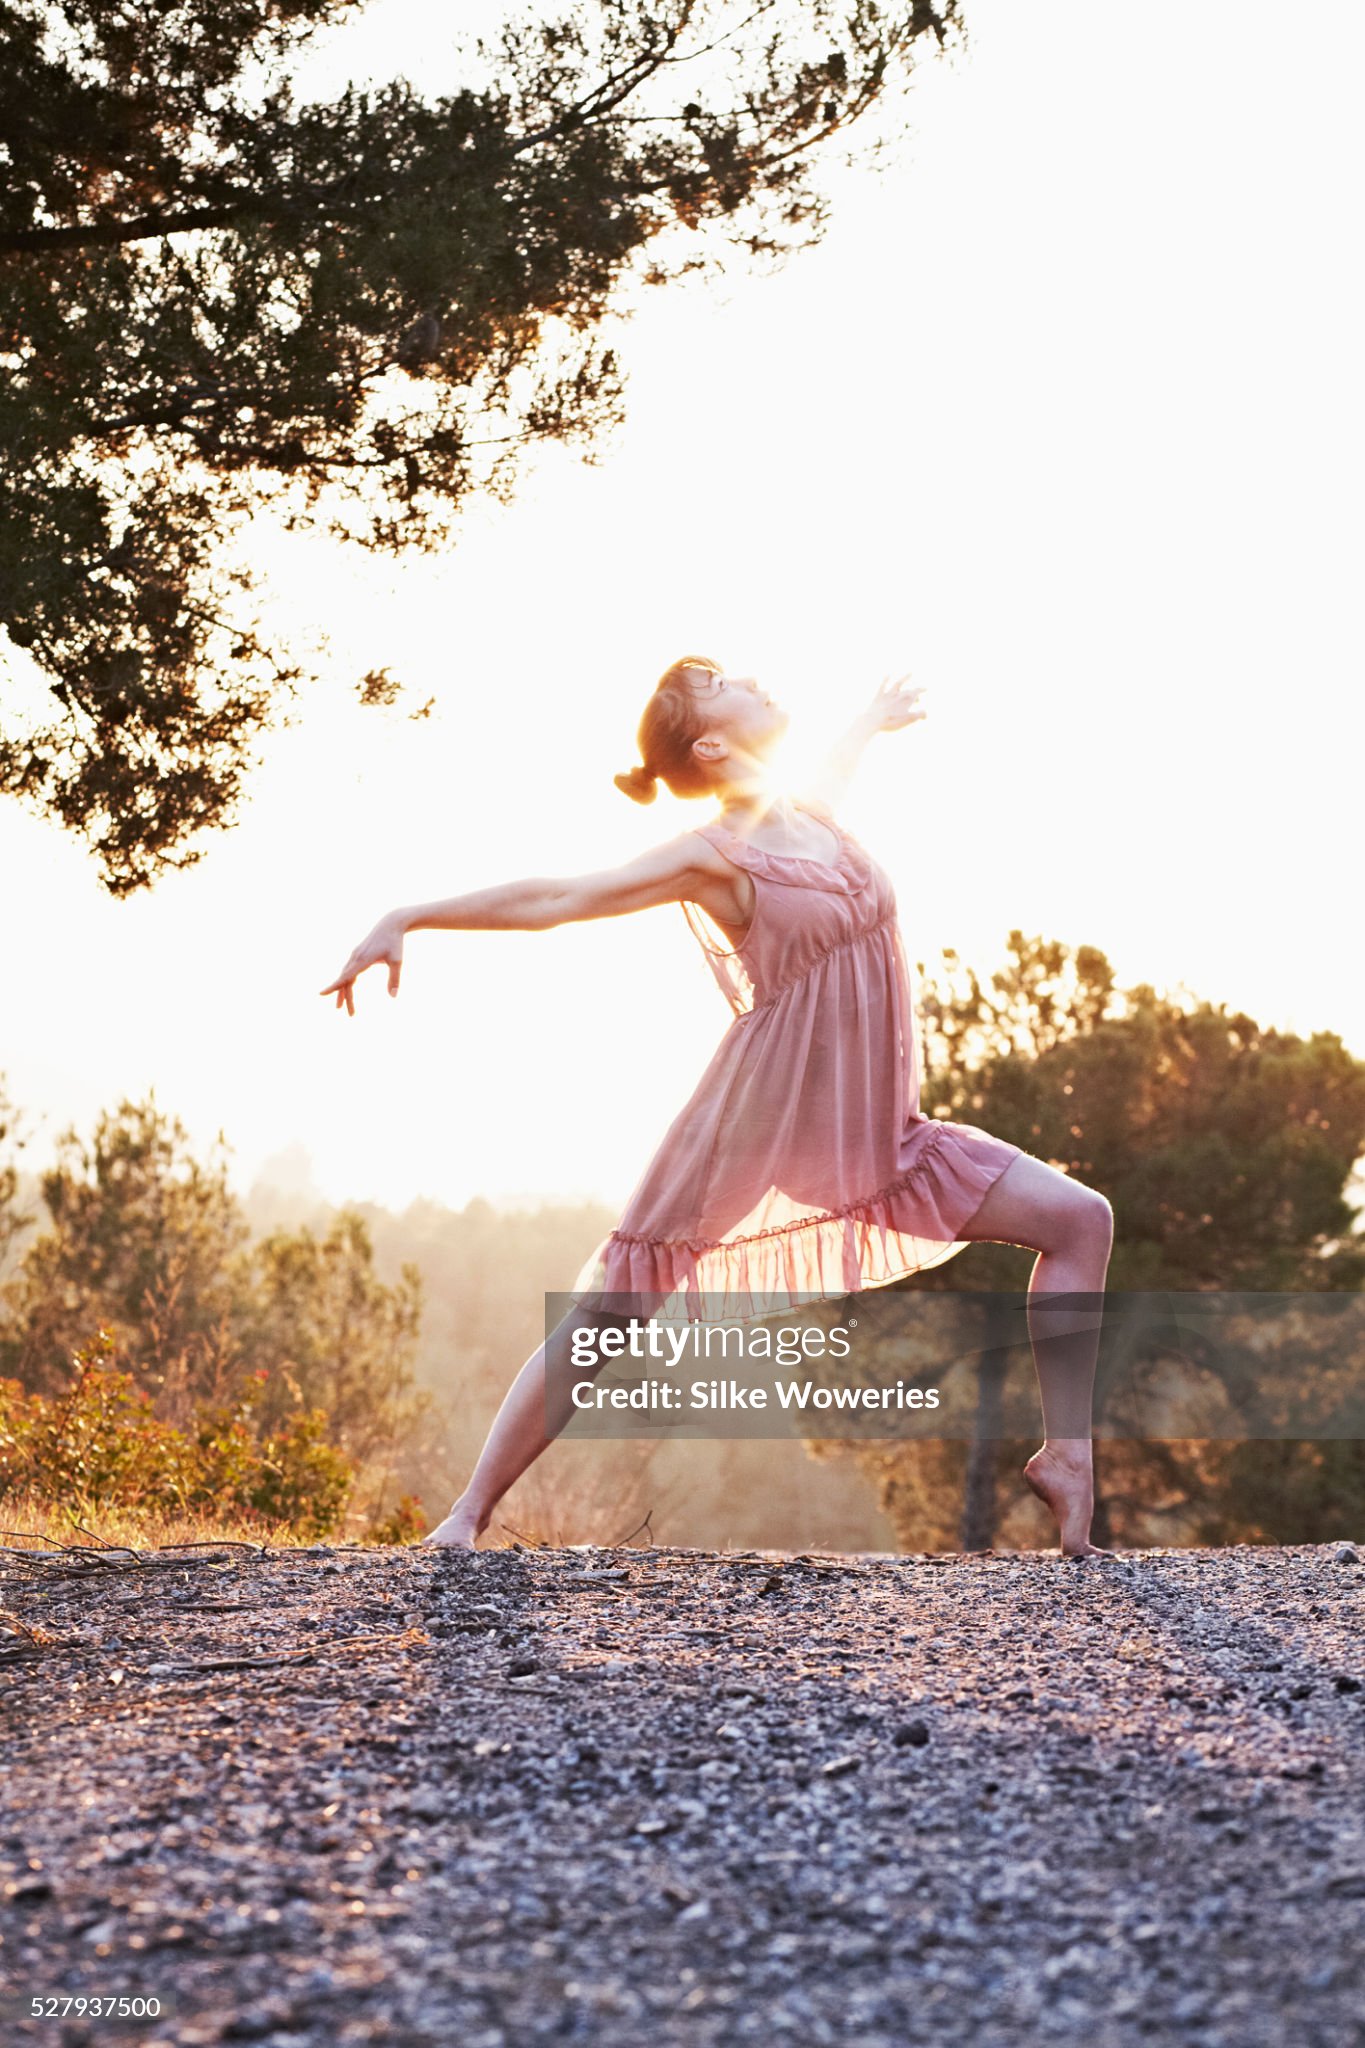 https://media.gettyimages.com/id/527937500/photo/young-woman-dancing-at-sunset.jpg?s=2048x2048&amp;w=gi&amp;k=20&amp;c=C8bKBo-SSs3v3brPApO2NiGMSyvAW9FACXtGZ7Ry9MU=